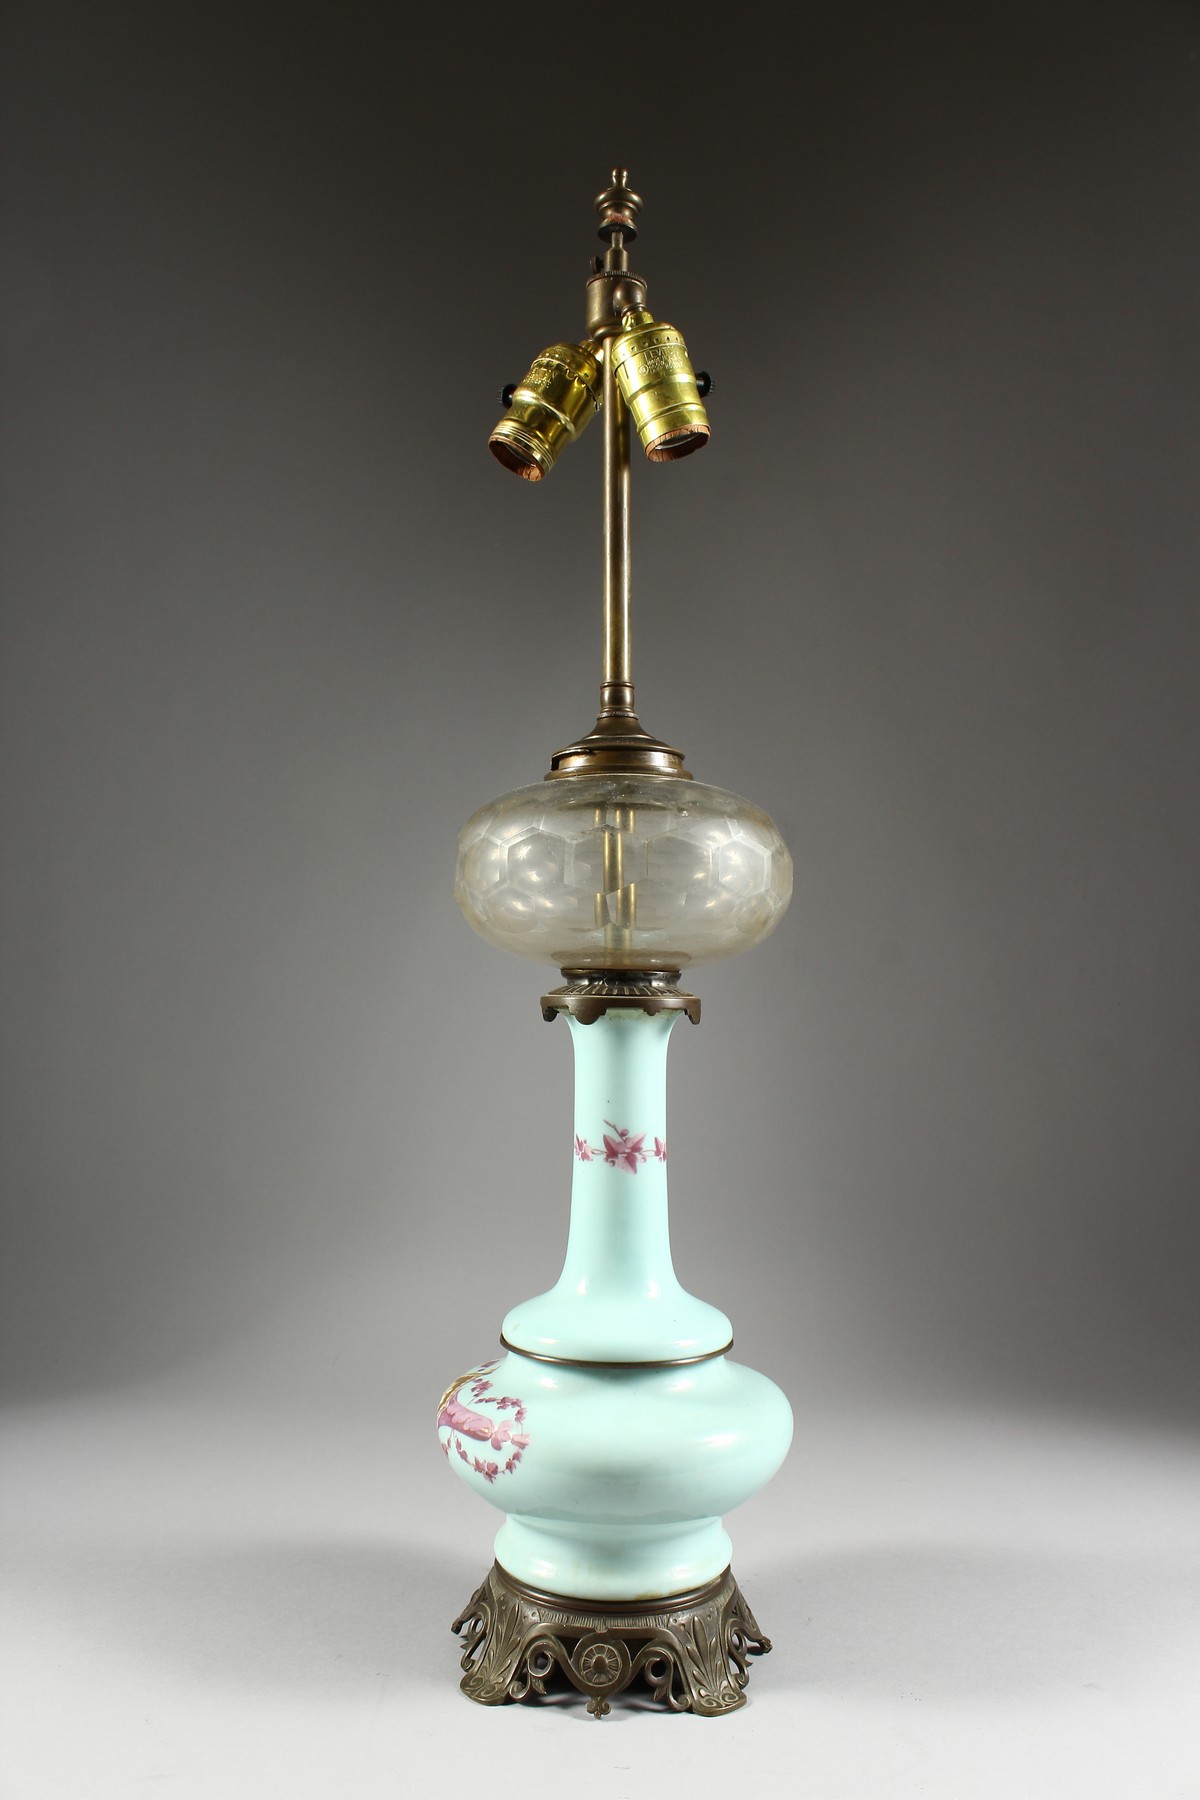 A VICTORIAN OPALINE LAMP with glass reservoir and metal mounts. 26ins high overall. - Image 3 of 7